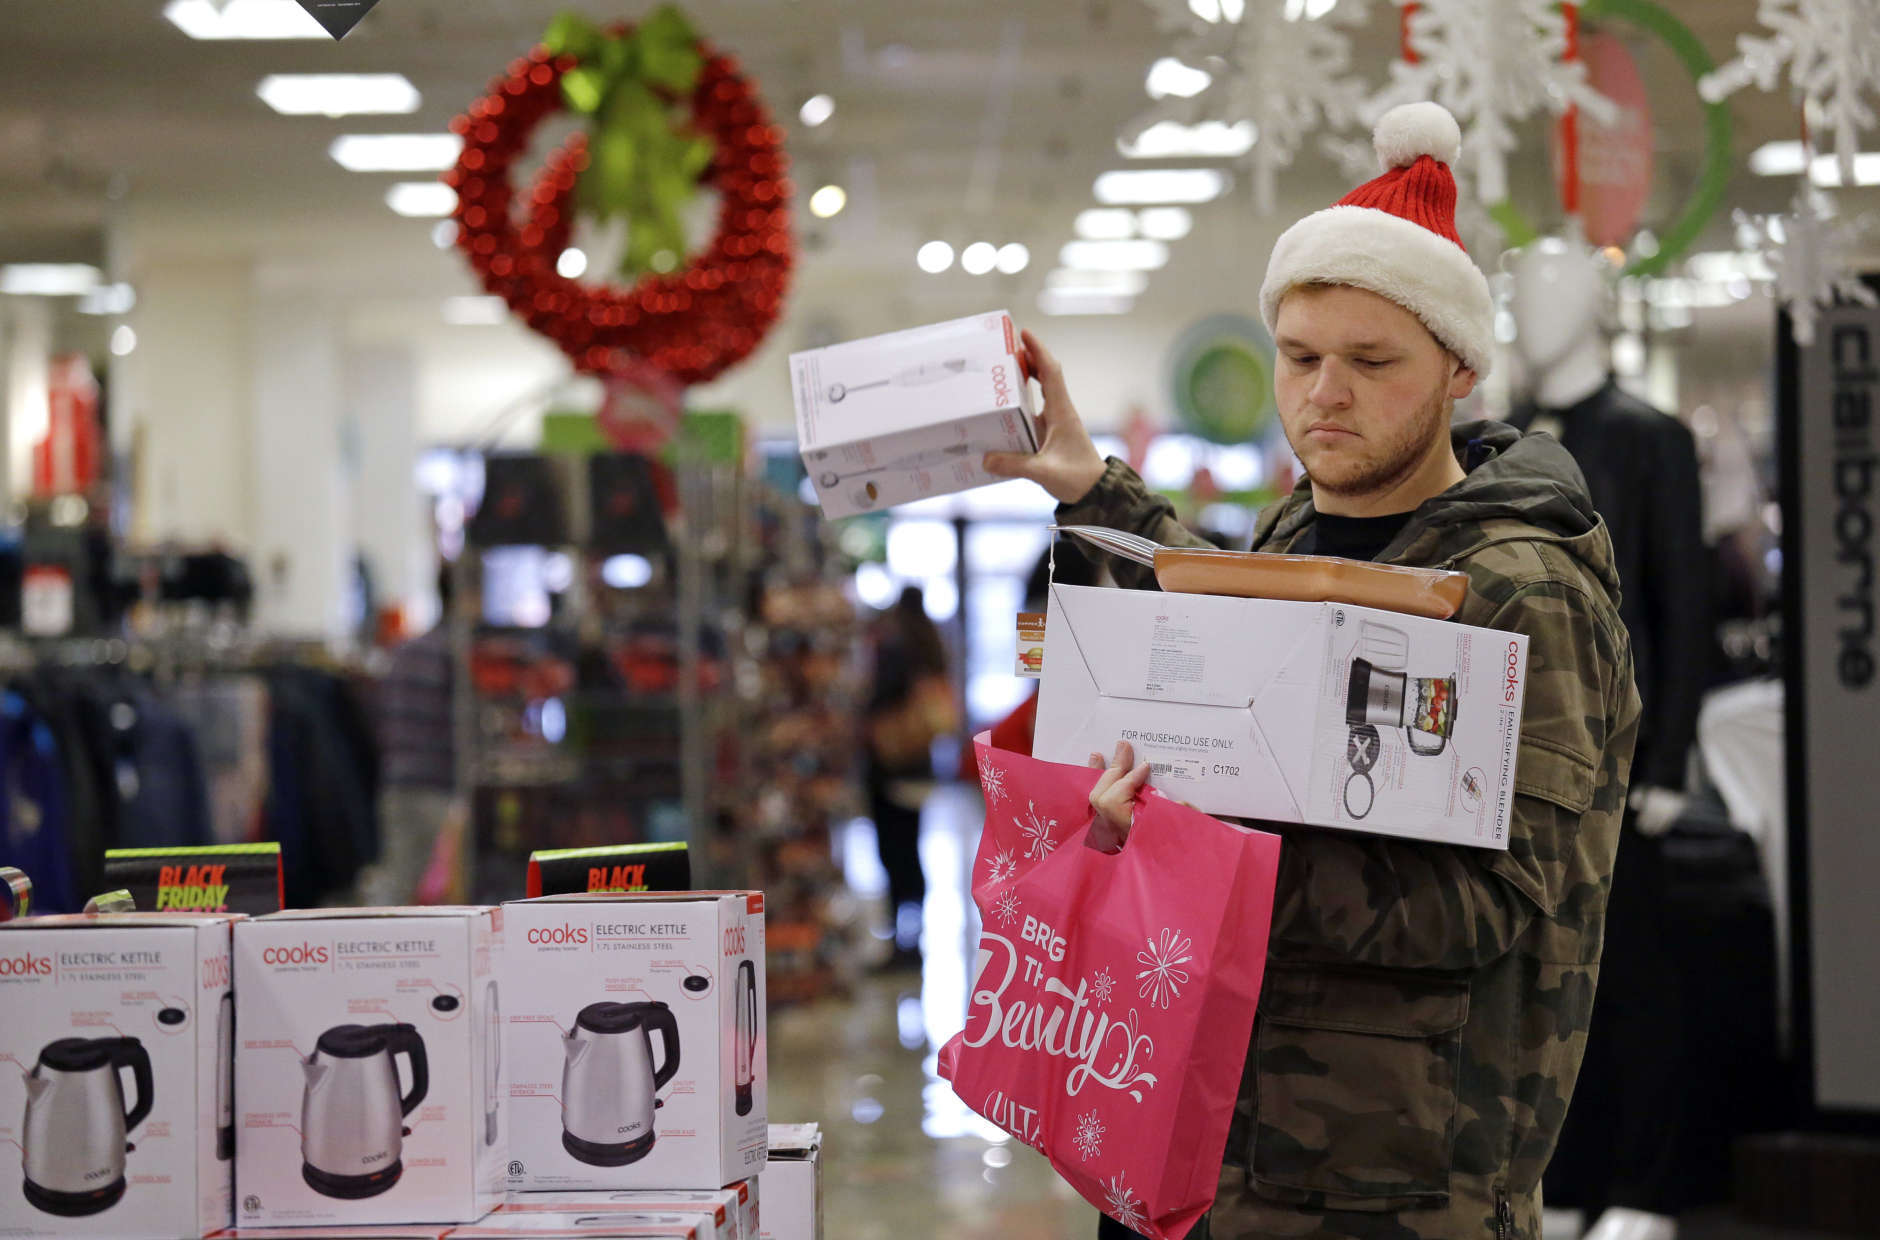 Joey Ellis adds to his armful of items while shopping for deals at a J.C. Penney store, Friday, Nov. 24, 2017, in Seattle. Black Friday has morphed from a single day when people got up early to score doorbusters into a whole season of deals, so shoppers may feel less need to be out. (AP Photo/Elaine Thompson)